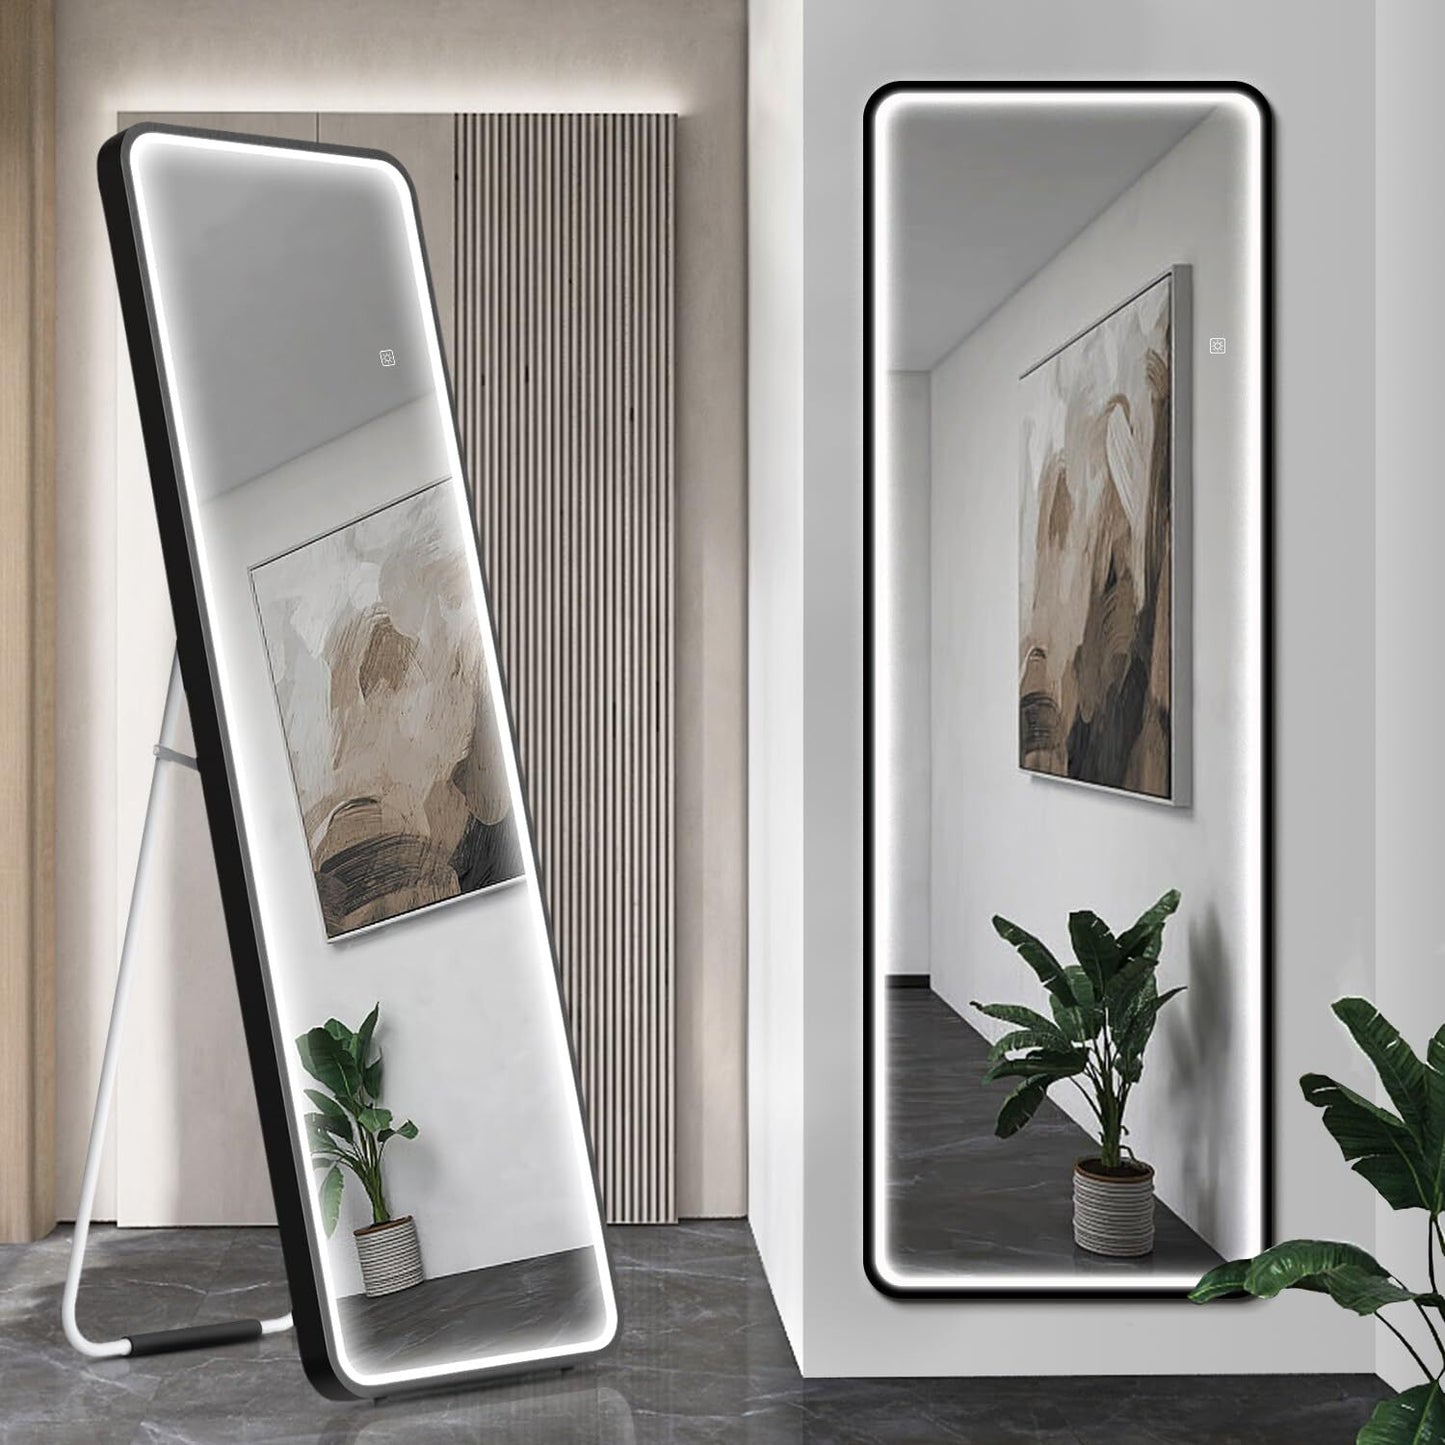 SBAGNO 63"x 20" Full Length Mirror with Lights,LED Full Length Mirror,Lighted Full Body Length Light up Mirror Touch,Free Standing Mirror,Wall Mounted/Leaning